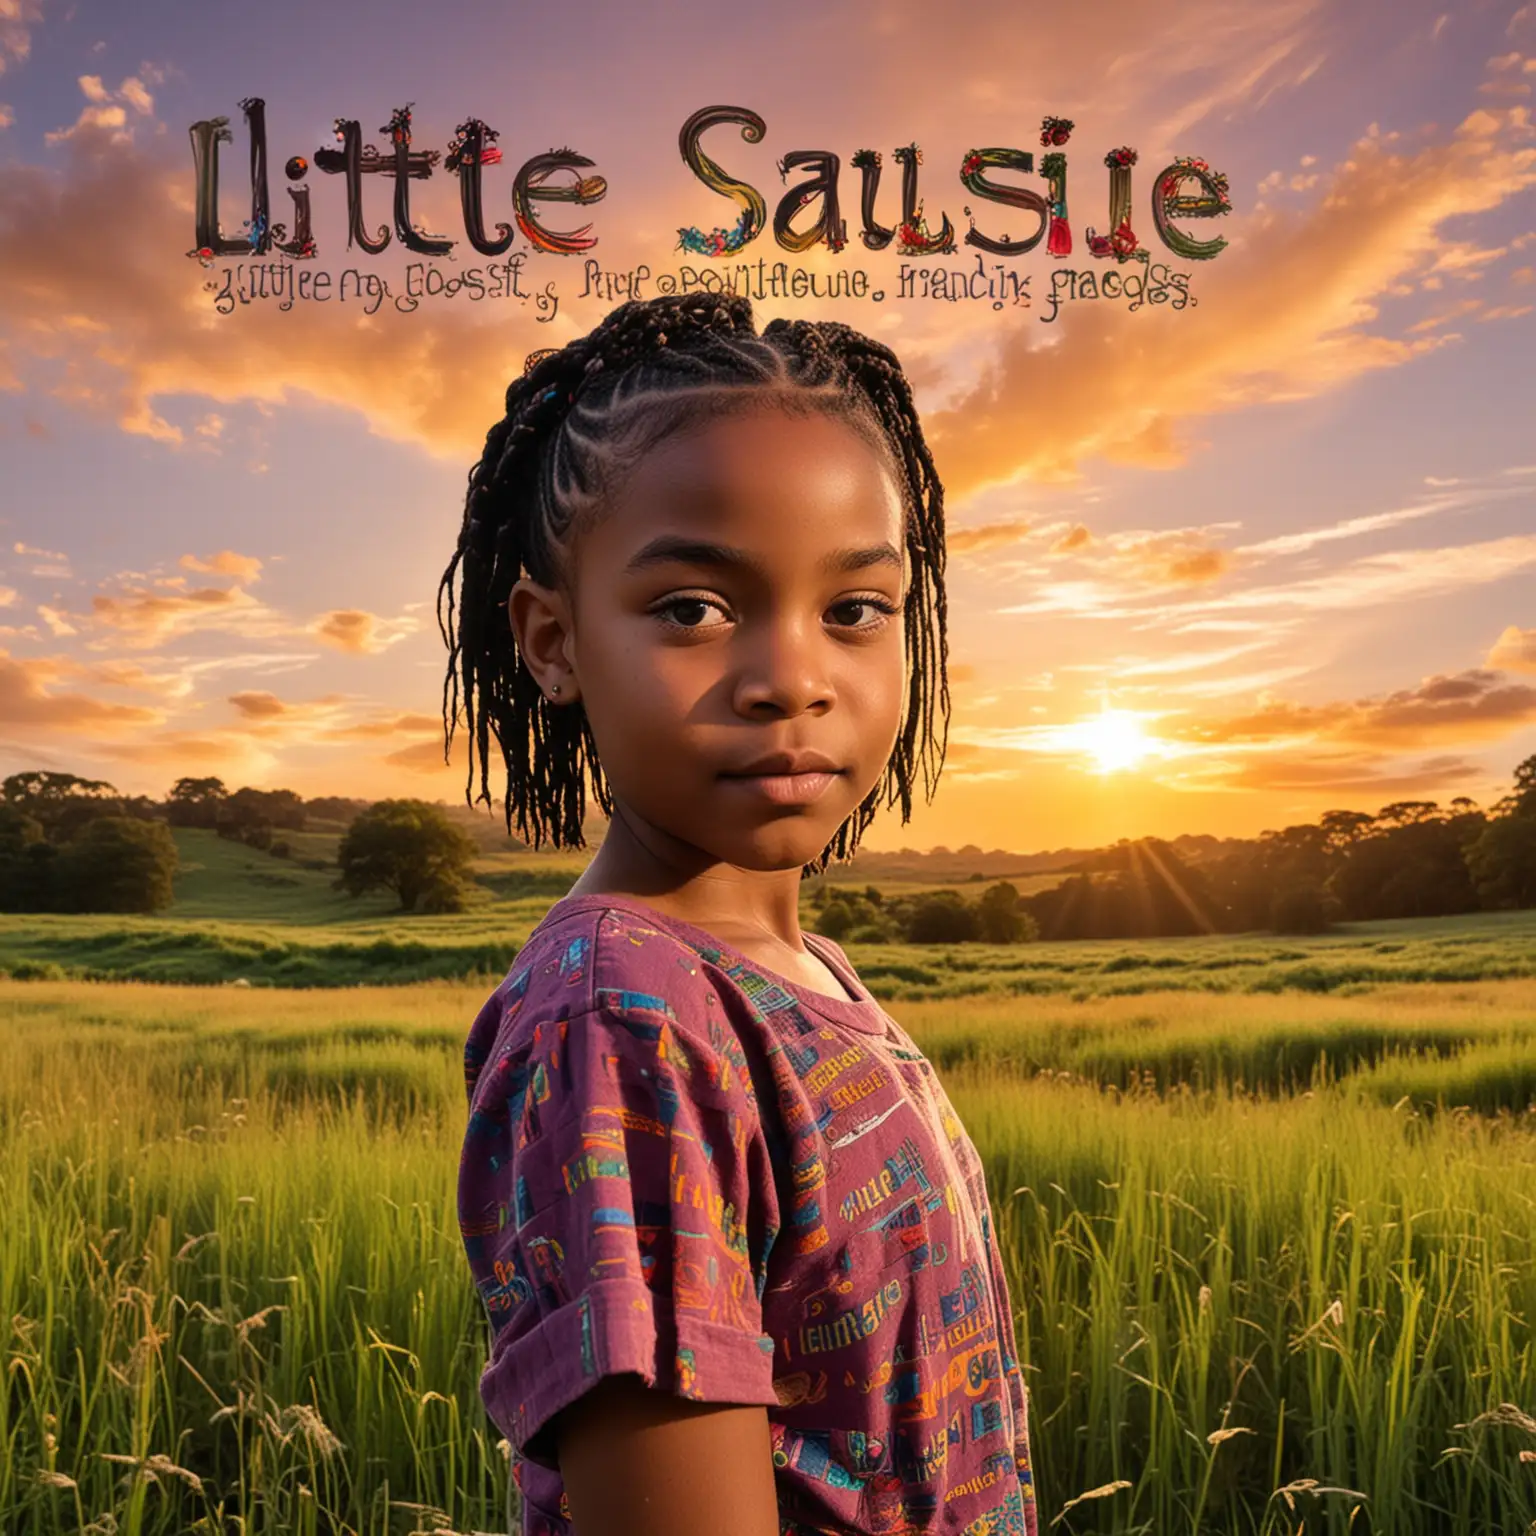 a young black girl child with short braids standing in a field of beautiful  lush grass scenery with a sunset in the background with the colorful words "Little Susie" above her head